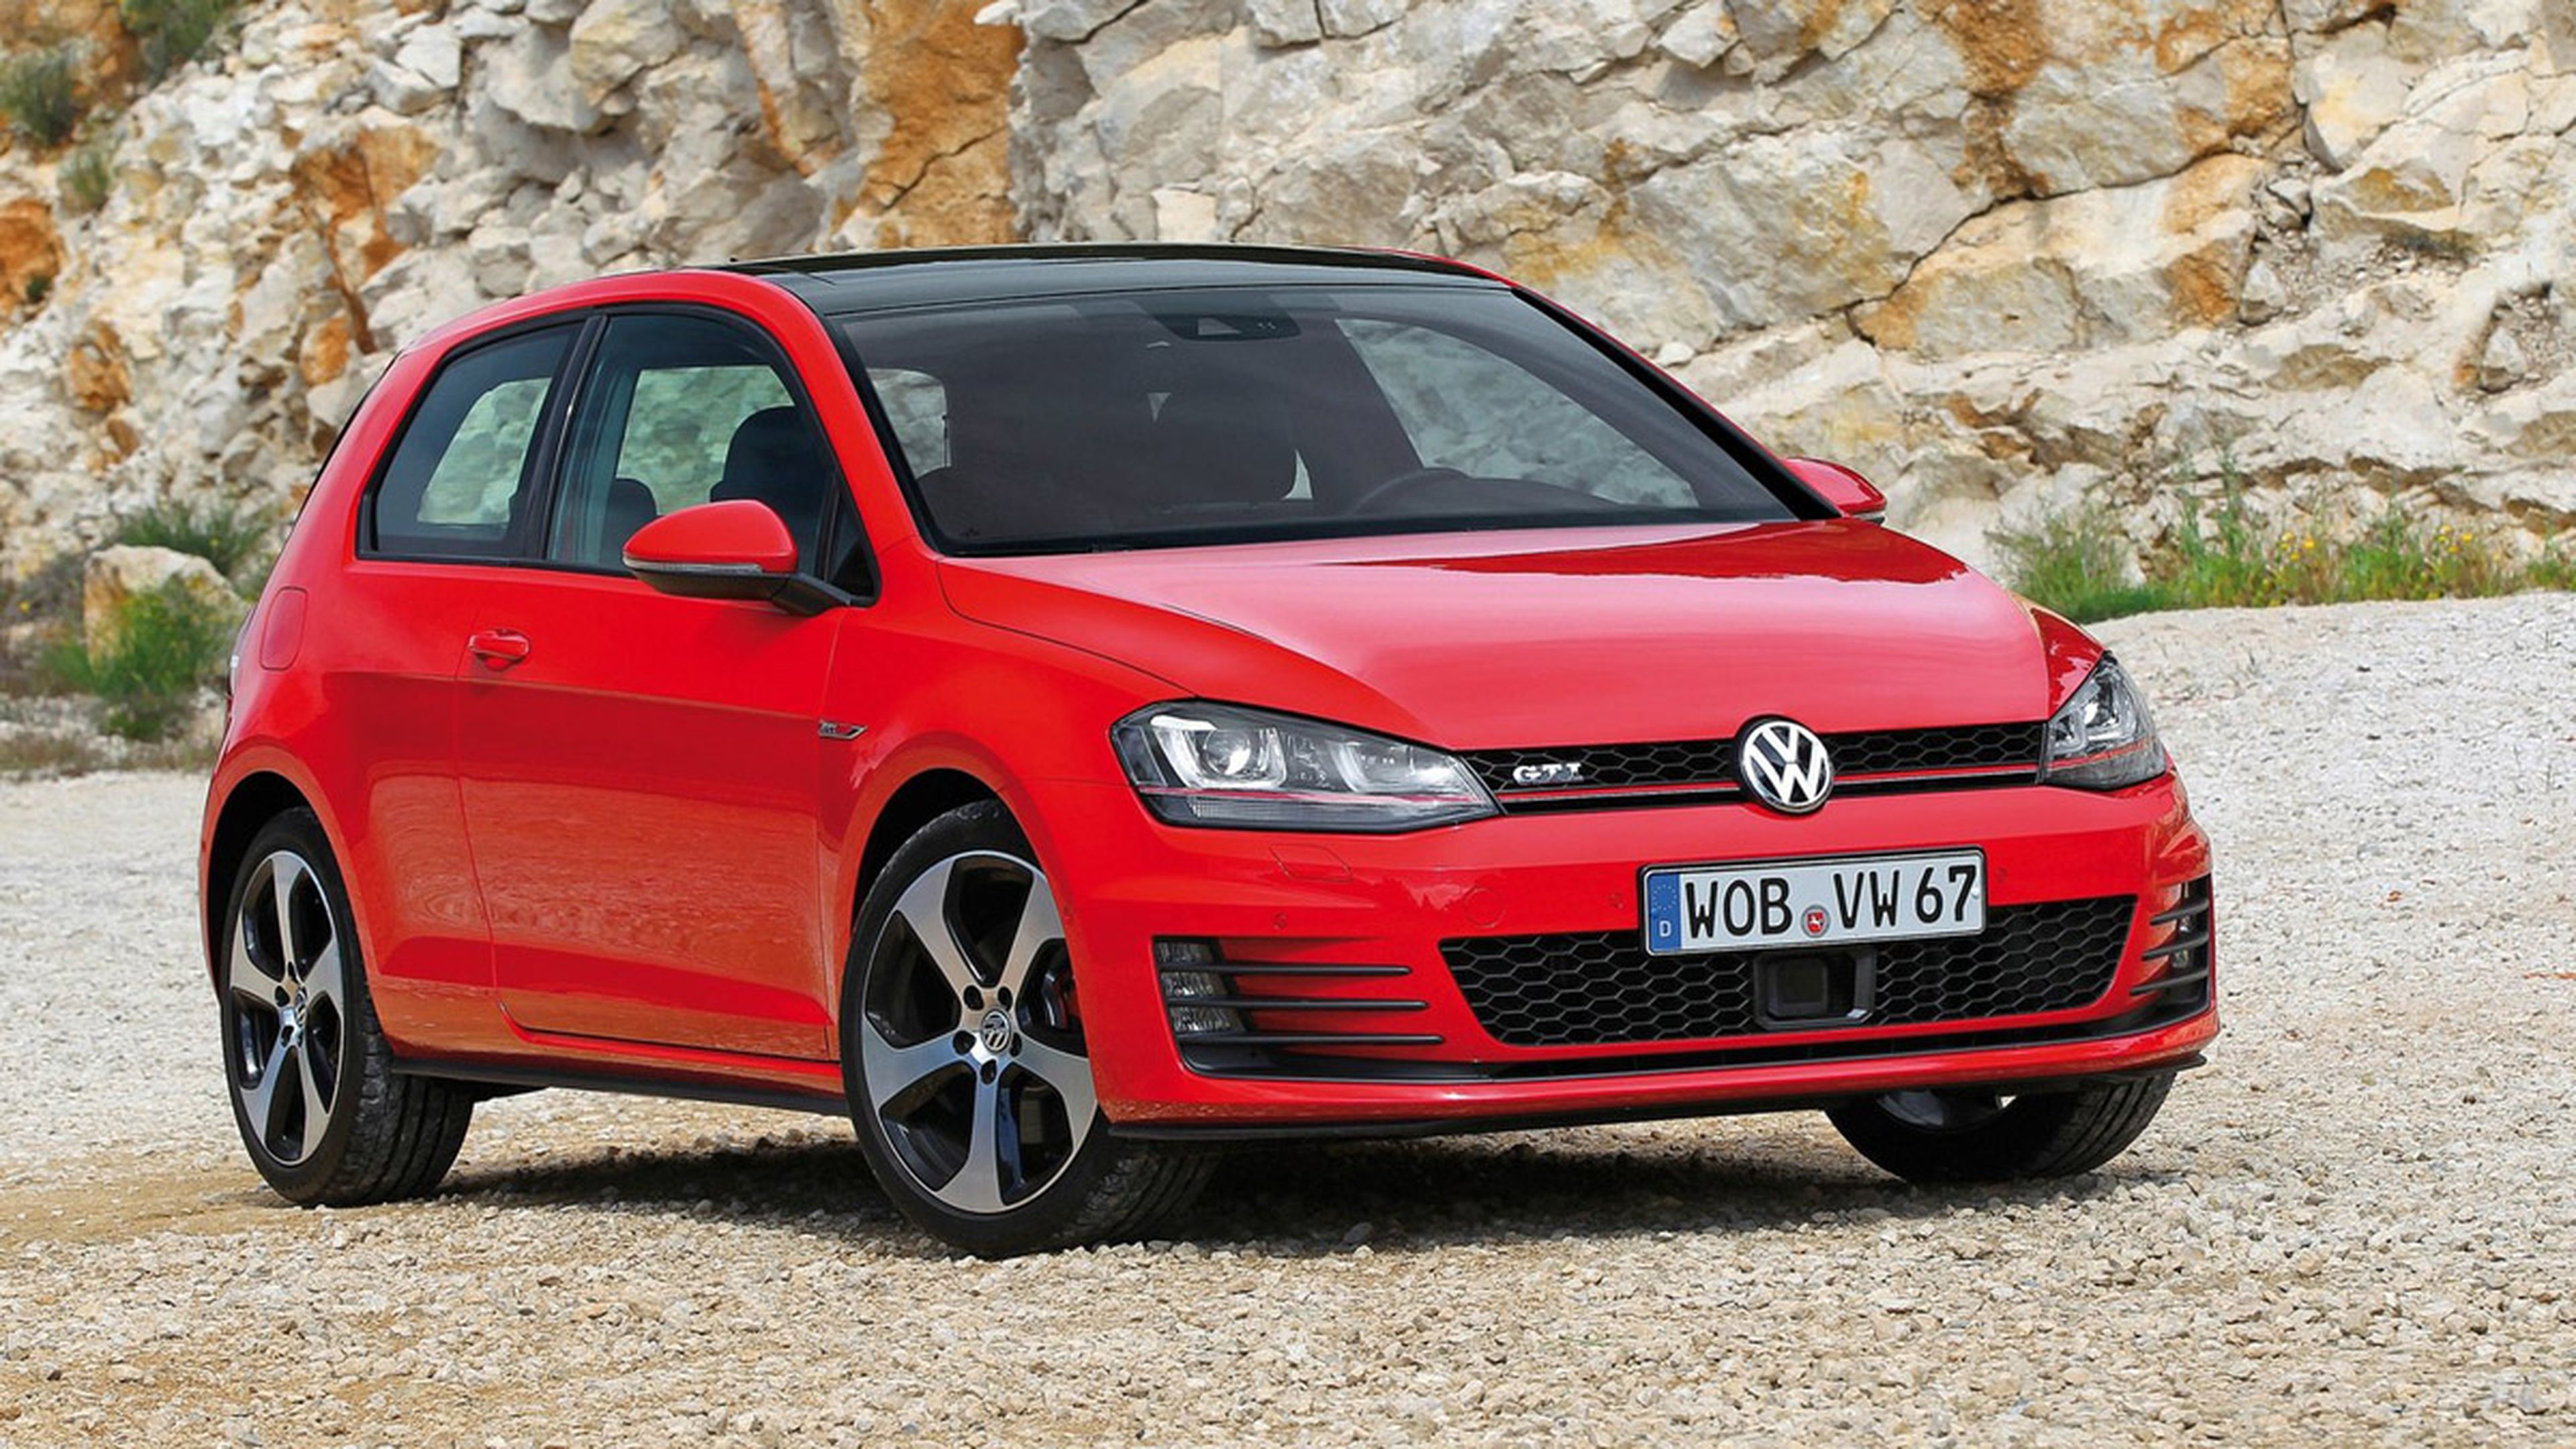 mejores-coches-según-consumer-reports-golf-gti